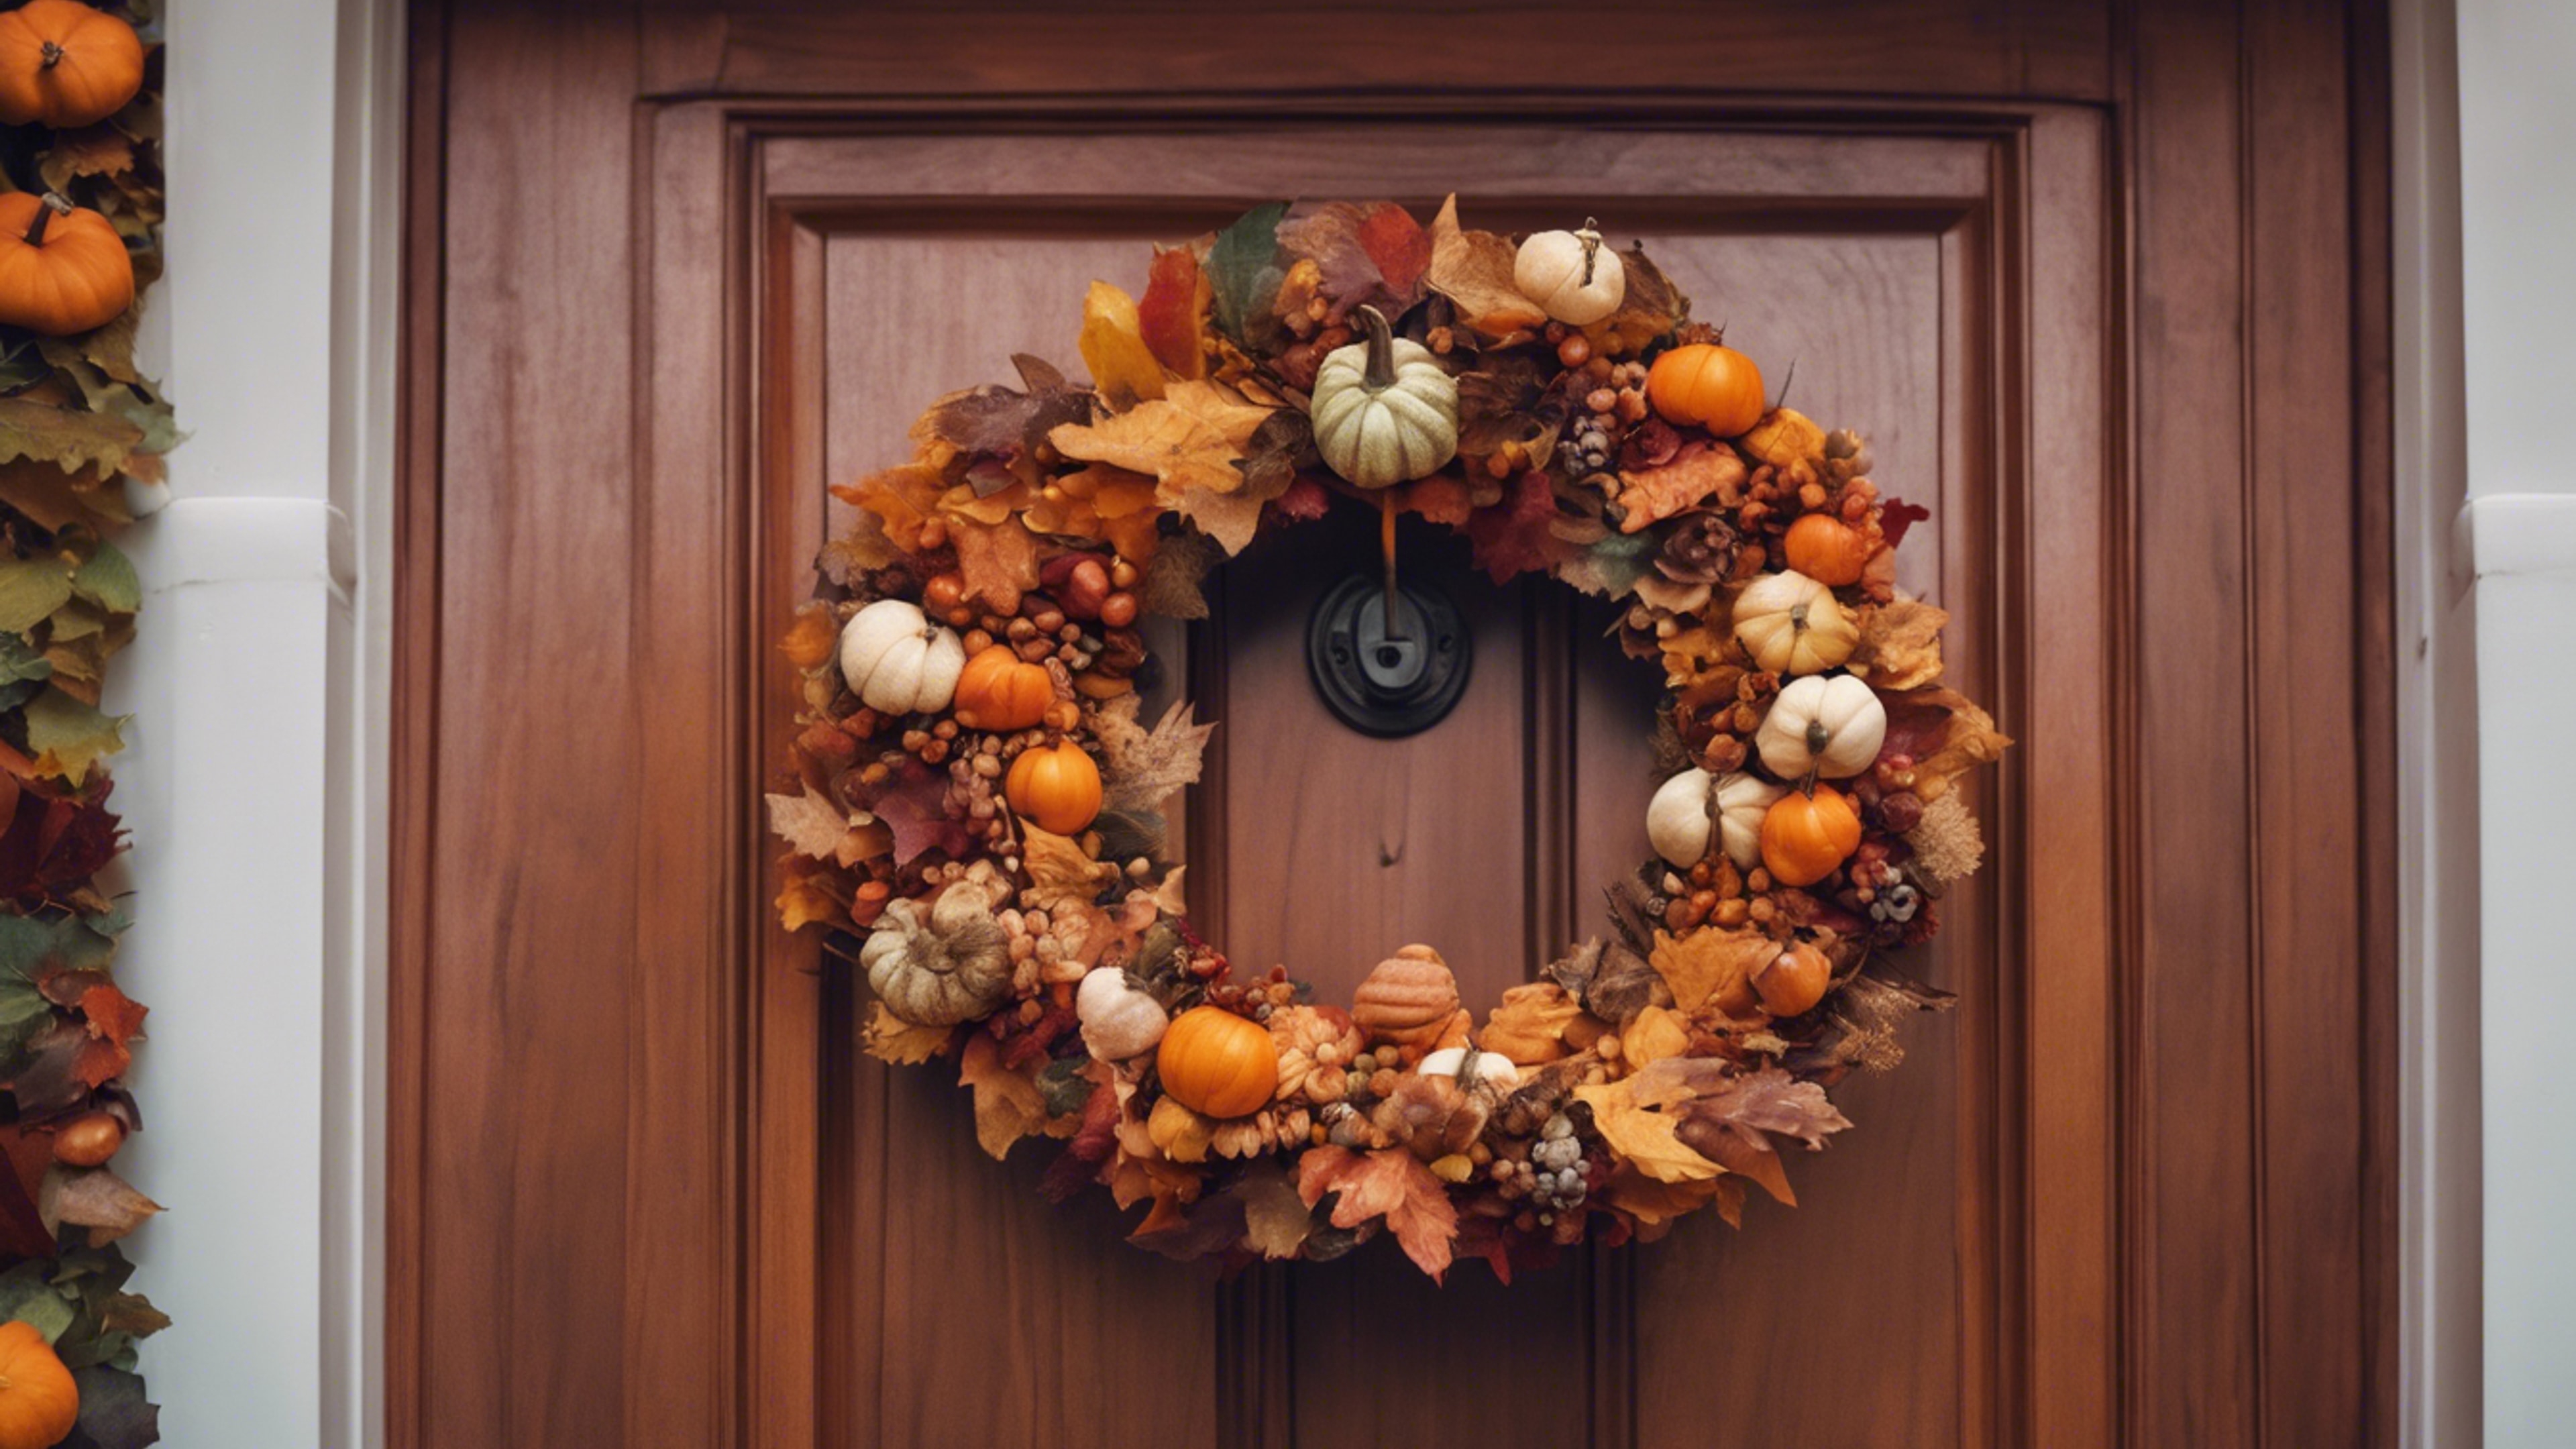 A festive autumn wreath made of colorful fall leaves and miniature pumpkins hanging elegantly on a mahogany door, signaling the start of the Thanksgiving holiday. Tapet[f1a39b05ecd5476686a3]